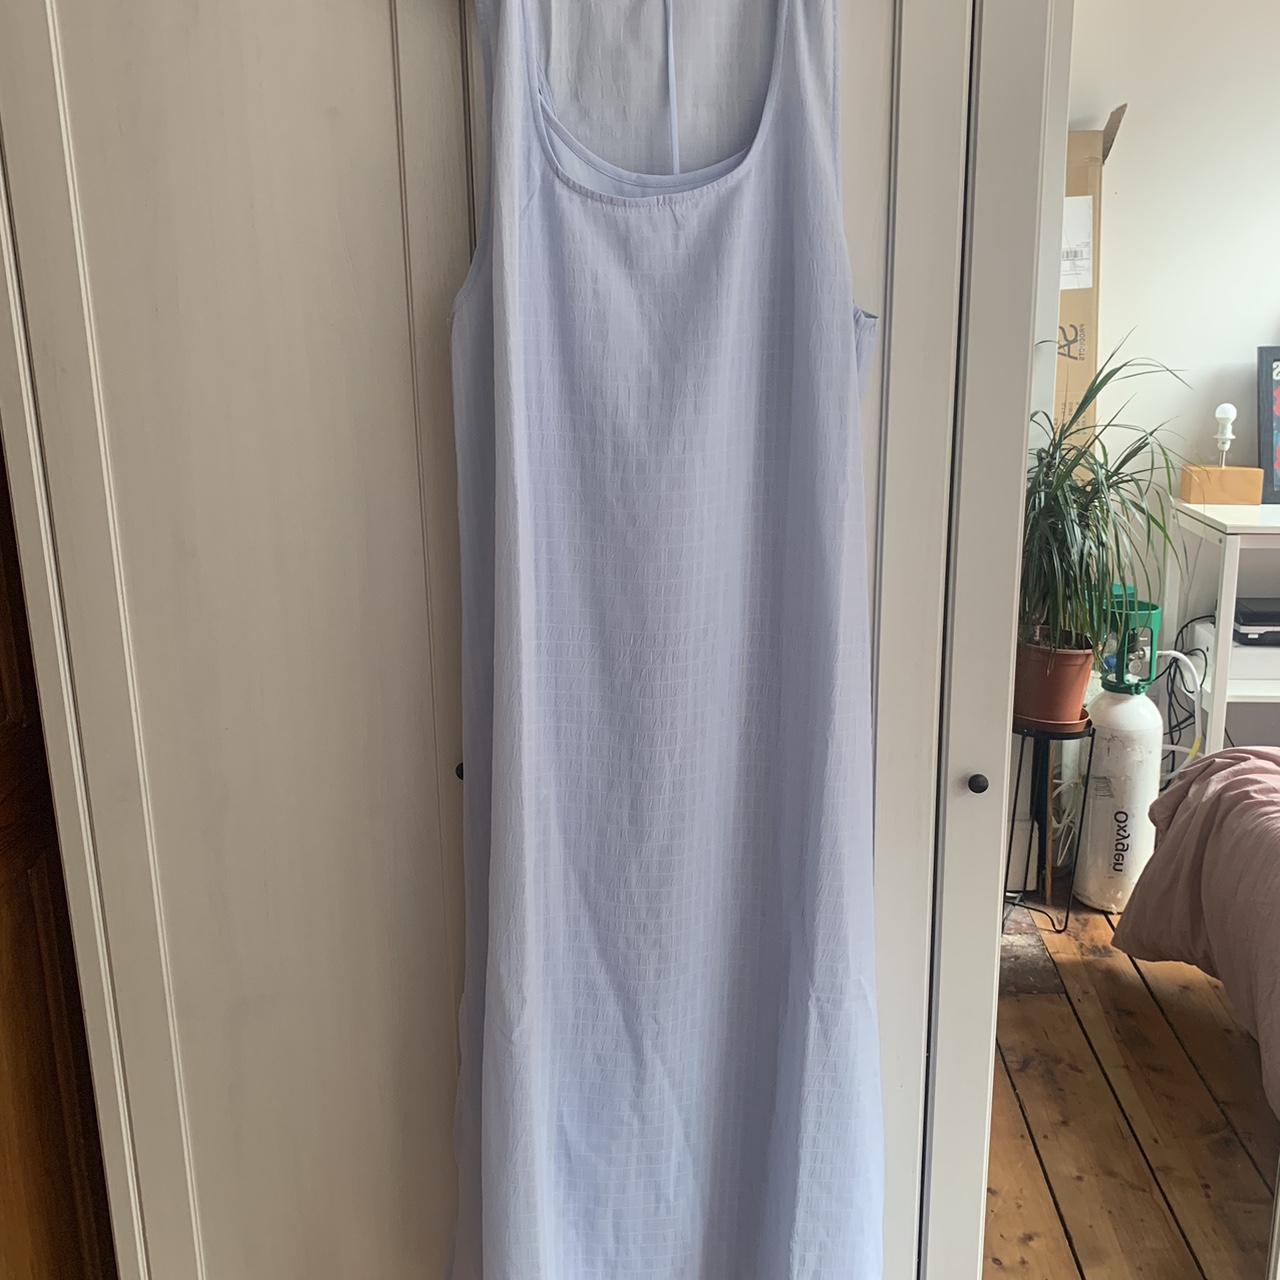 Omnes brand new with tags still on blue summer... - Depop